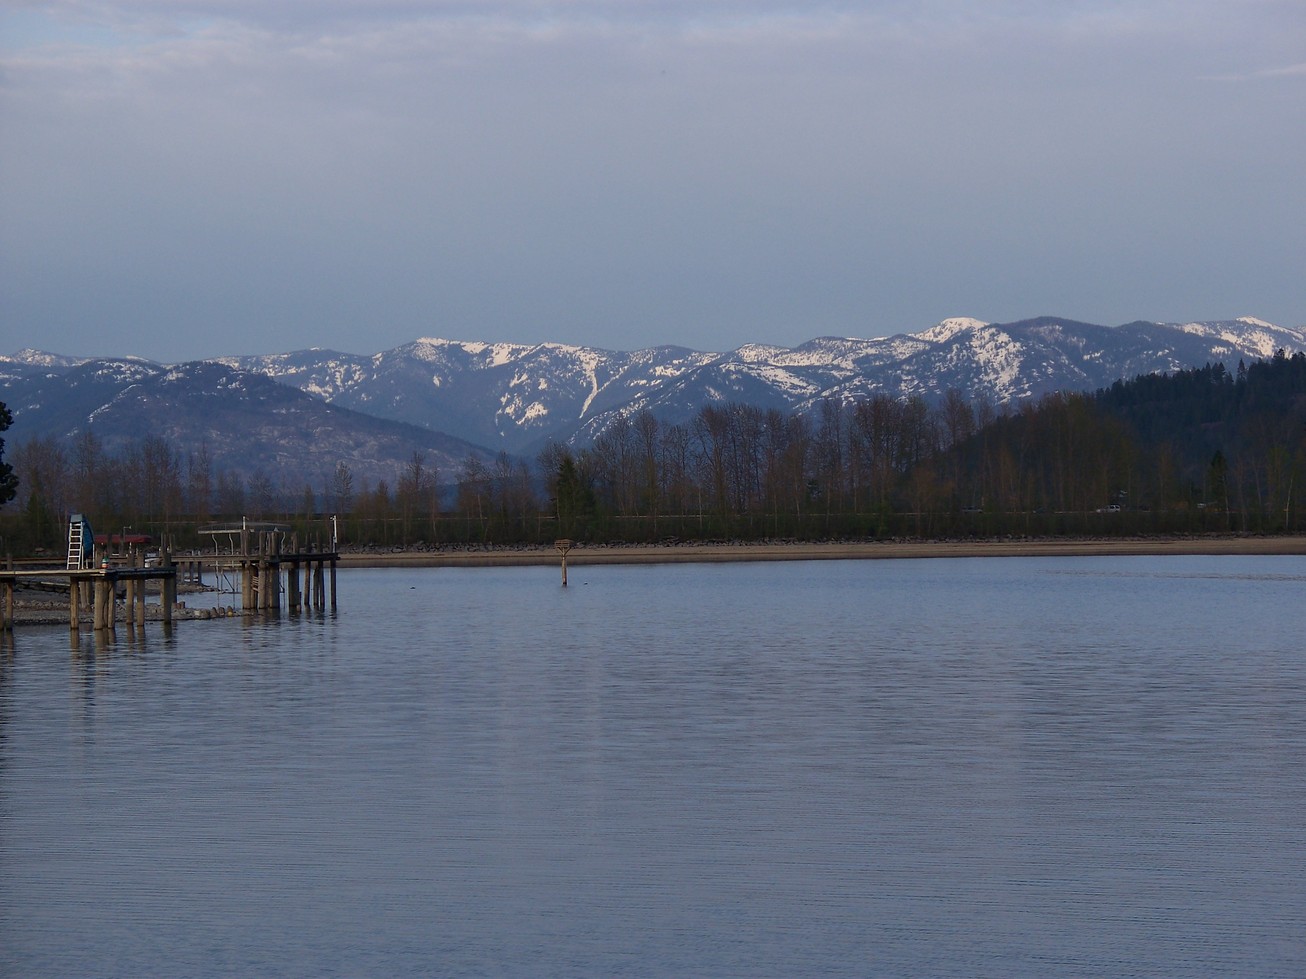 Sandpoint, ID: View from 3rd Ave Pier